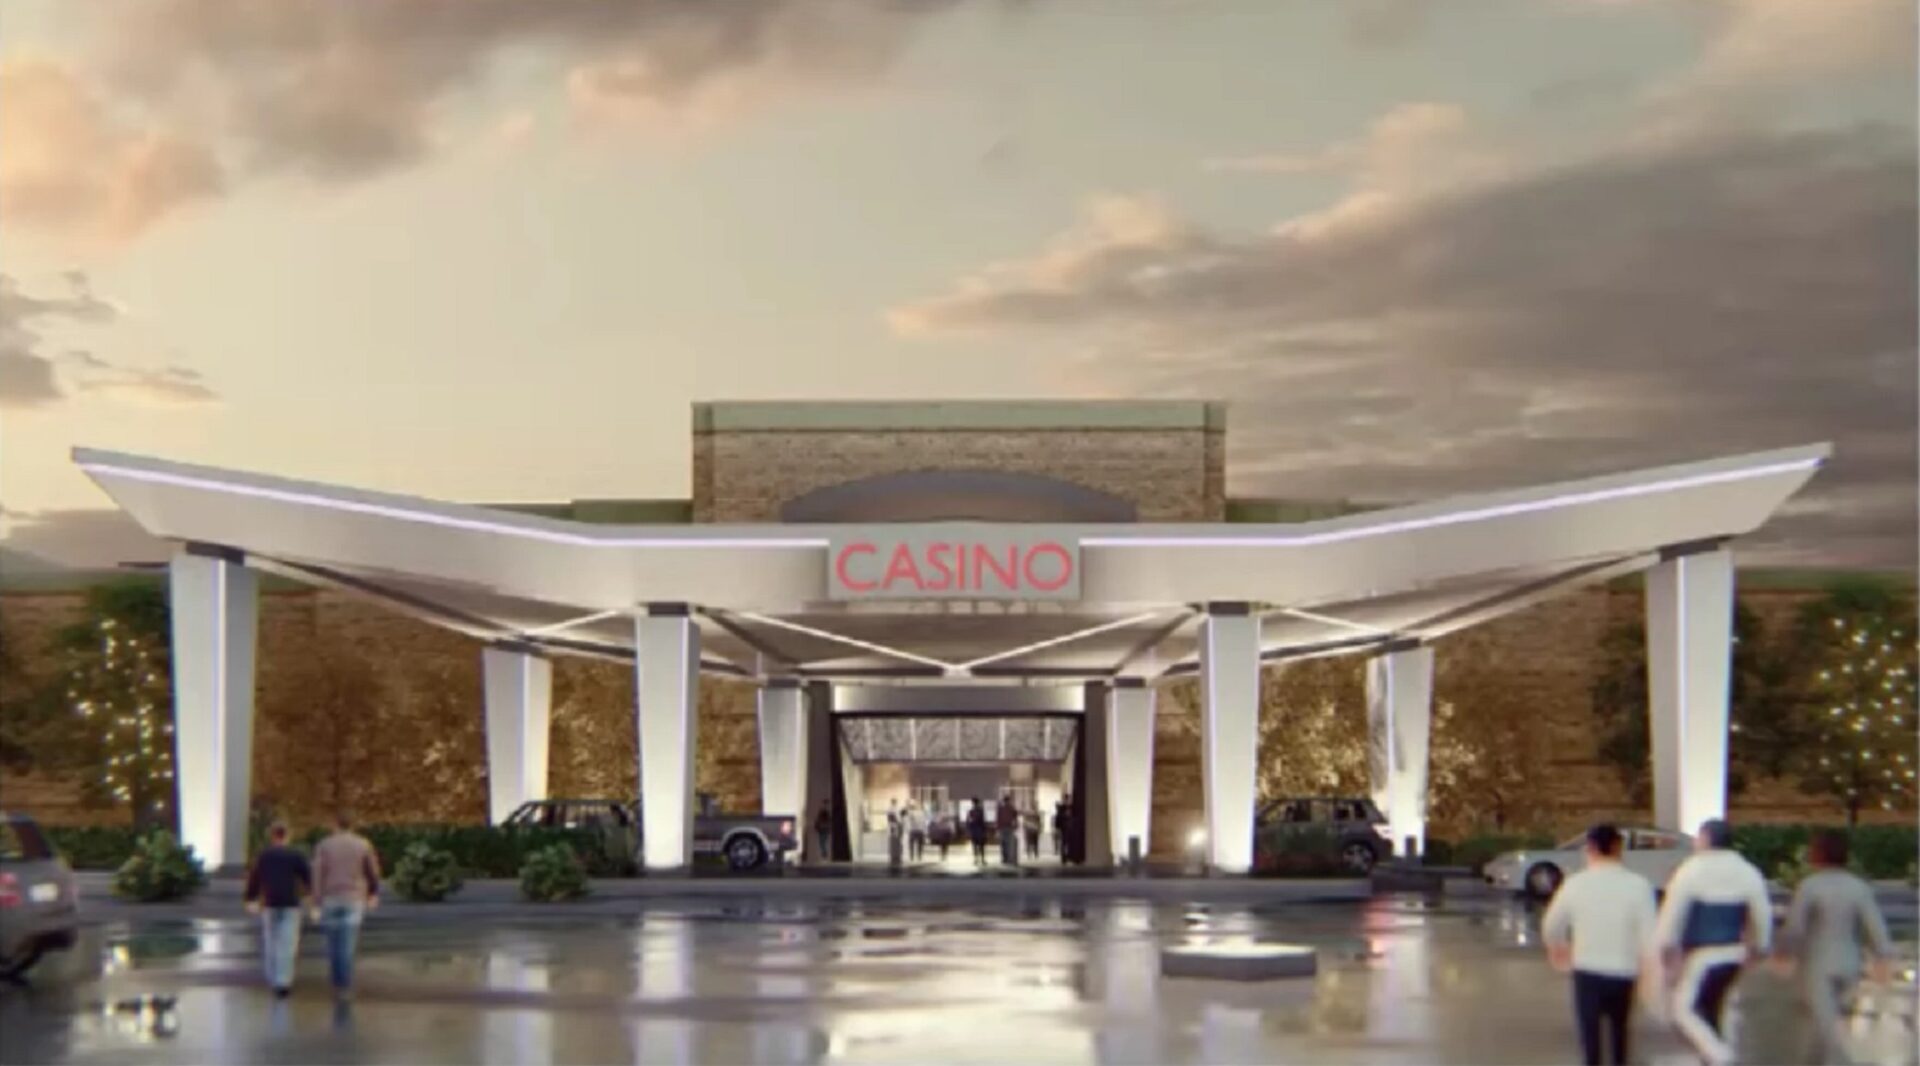 A rendering of the entryway to the casino SC Gaming OpCo LLC wants to build in the former Macy's in the Nittany Mall in State College.